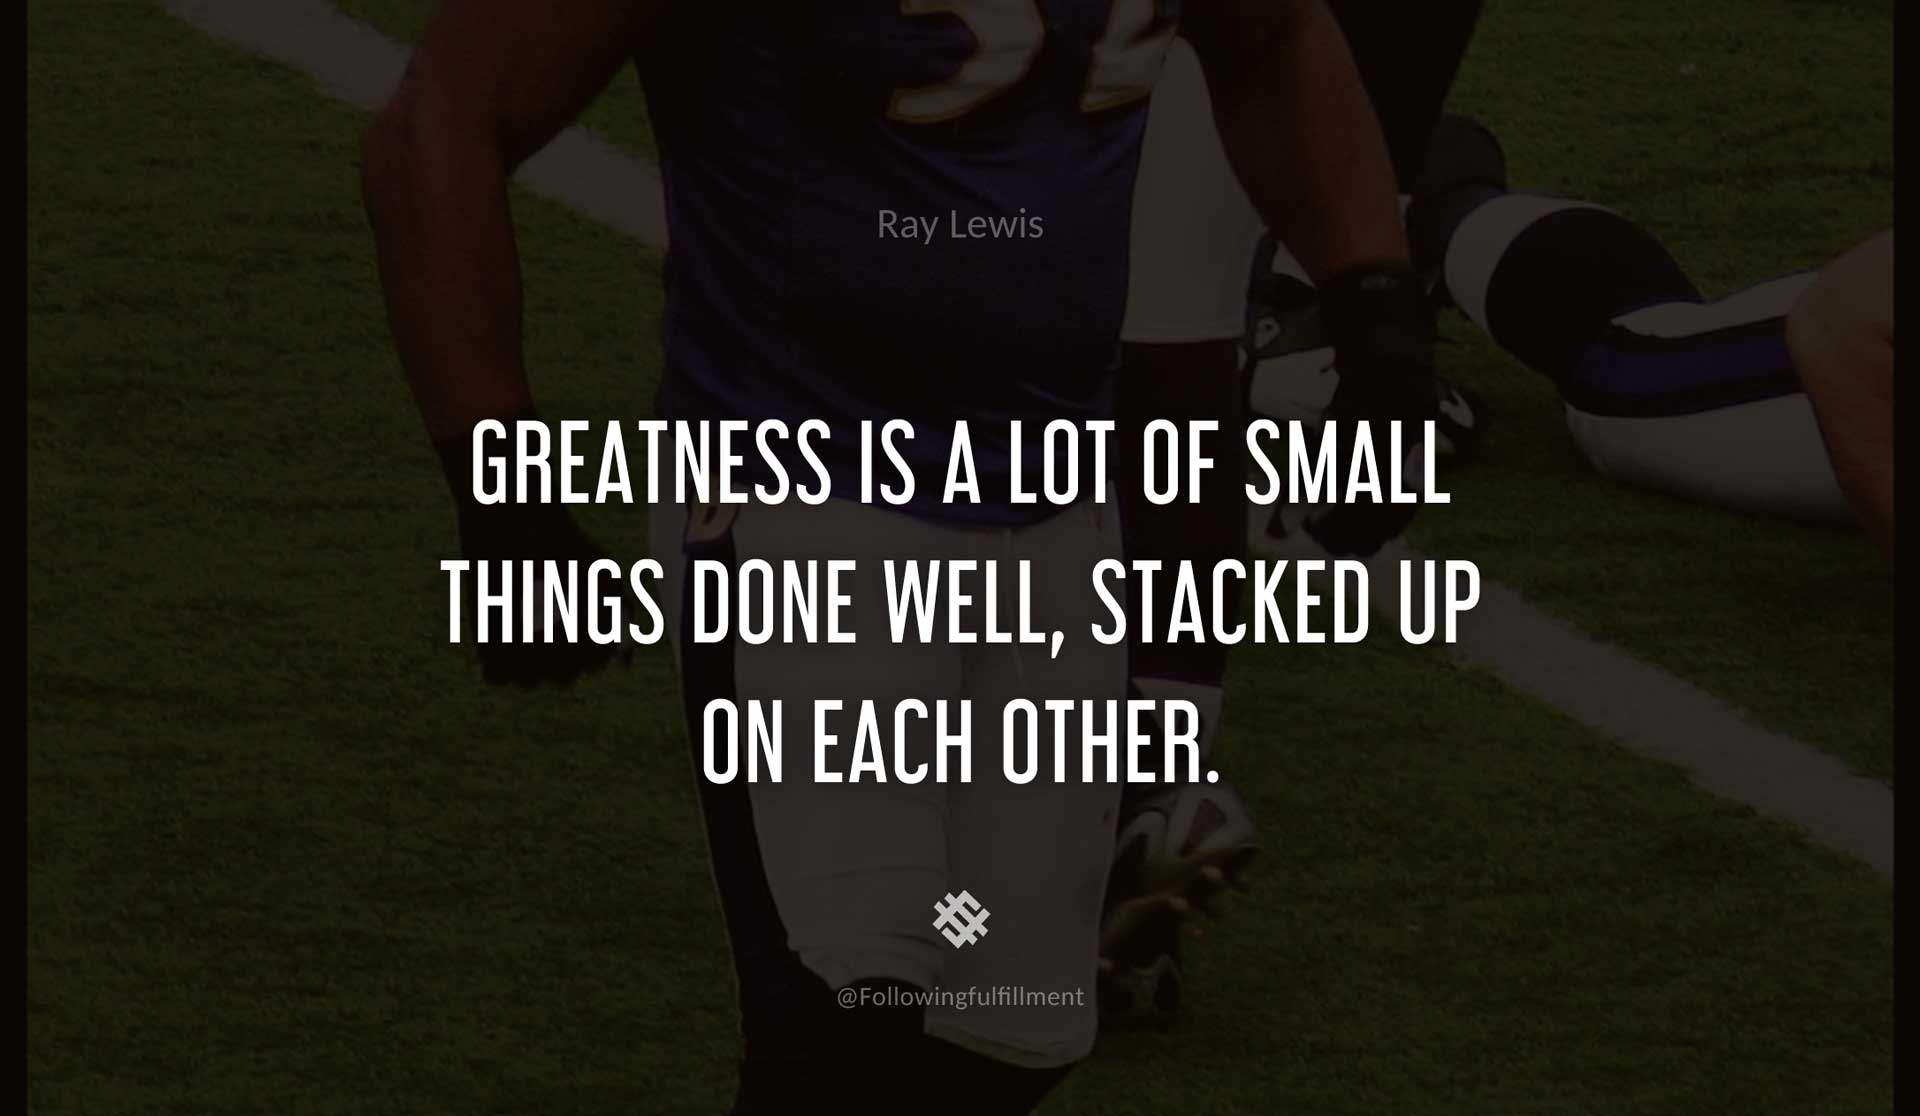 Greatness-is-a-lot-of-small-things-done-well,-stacked-up-on-each-other.-RAY-LEWIS-Quote.jpg